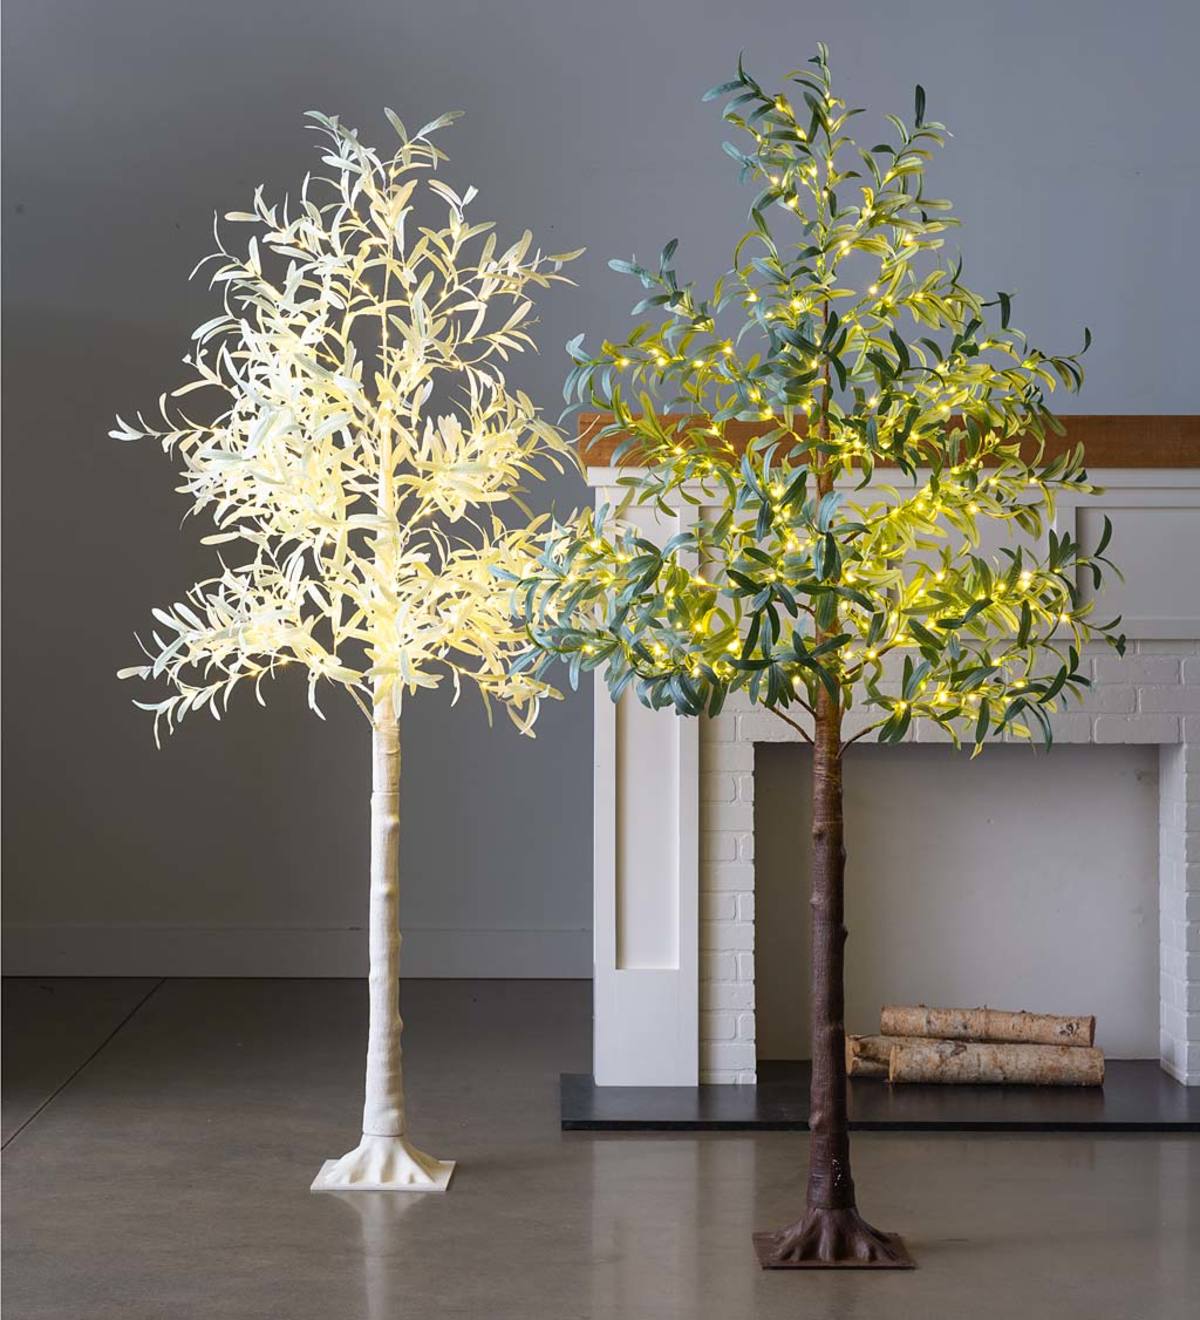 Indoor/ Outdoor Faux Lighted Olive Tree